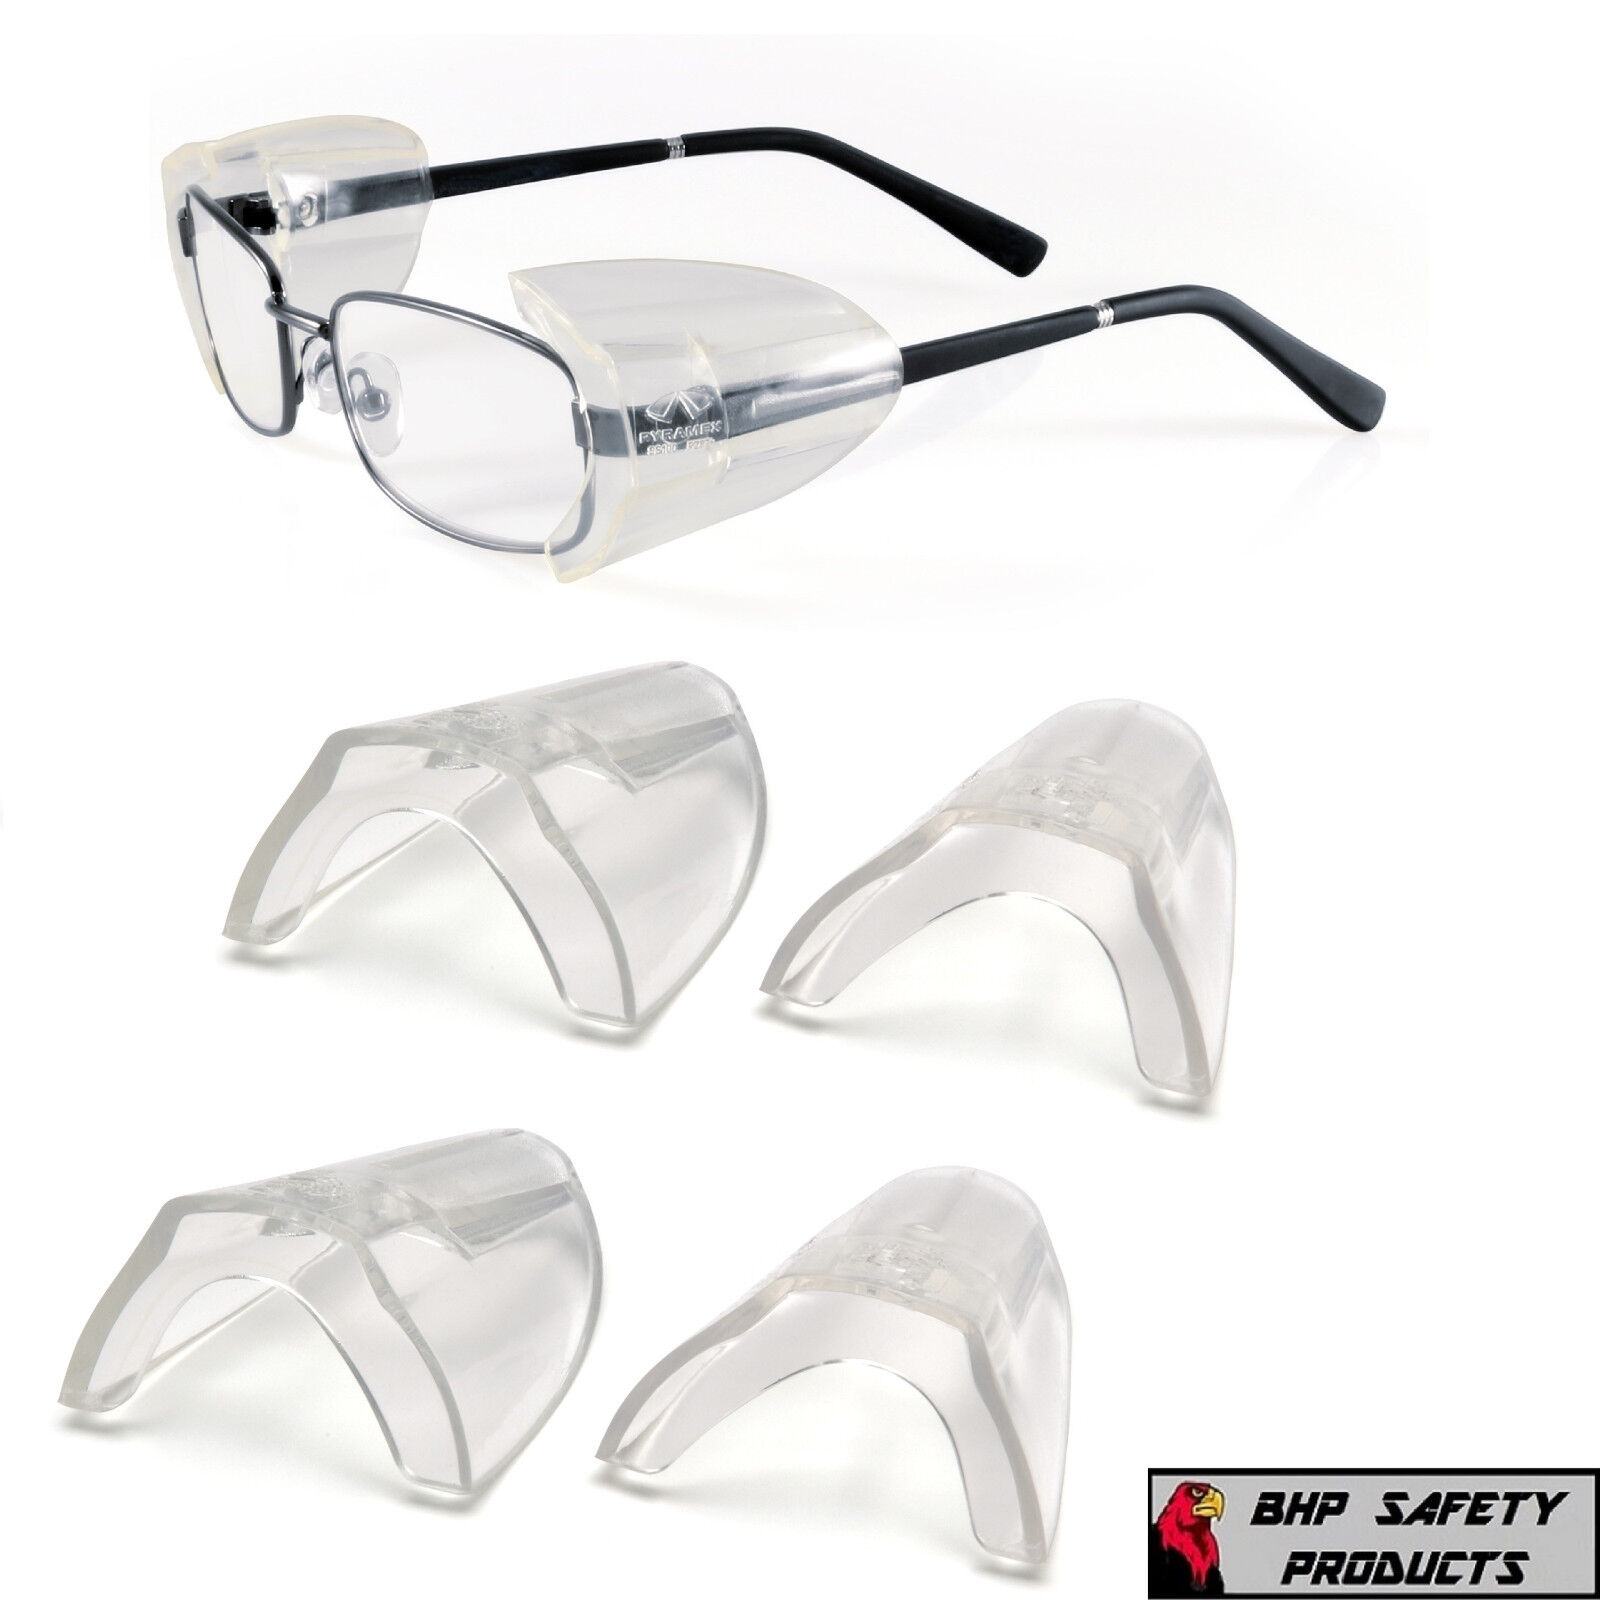 3 PAIR PYRAMEX SS100 FLEXIBLE CLEAR SIDE SHIELD FOR SAFETY GLASSES SLIP ON Z87+